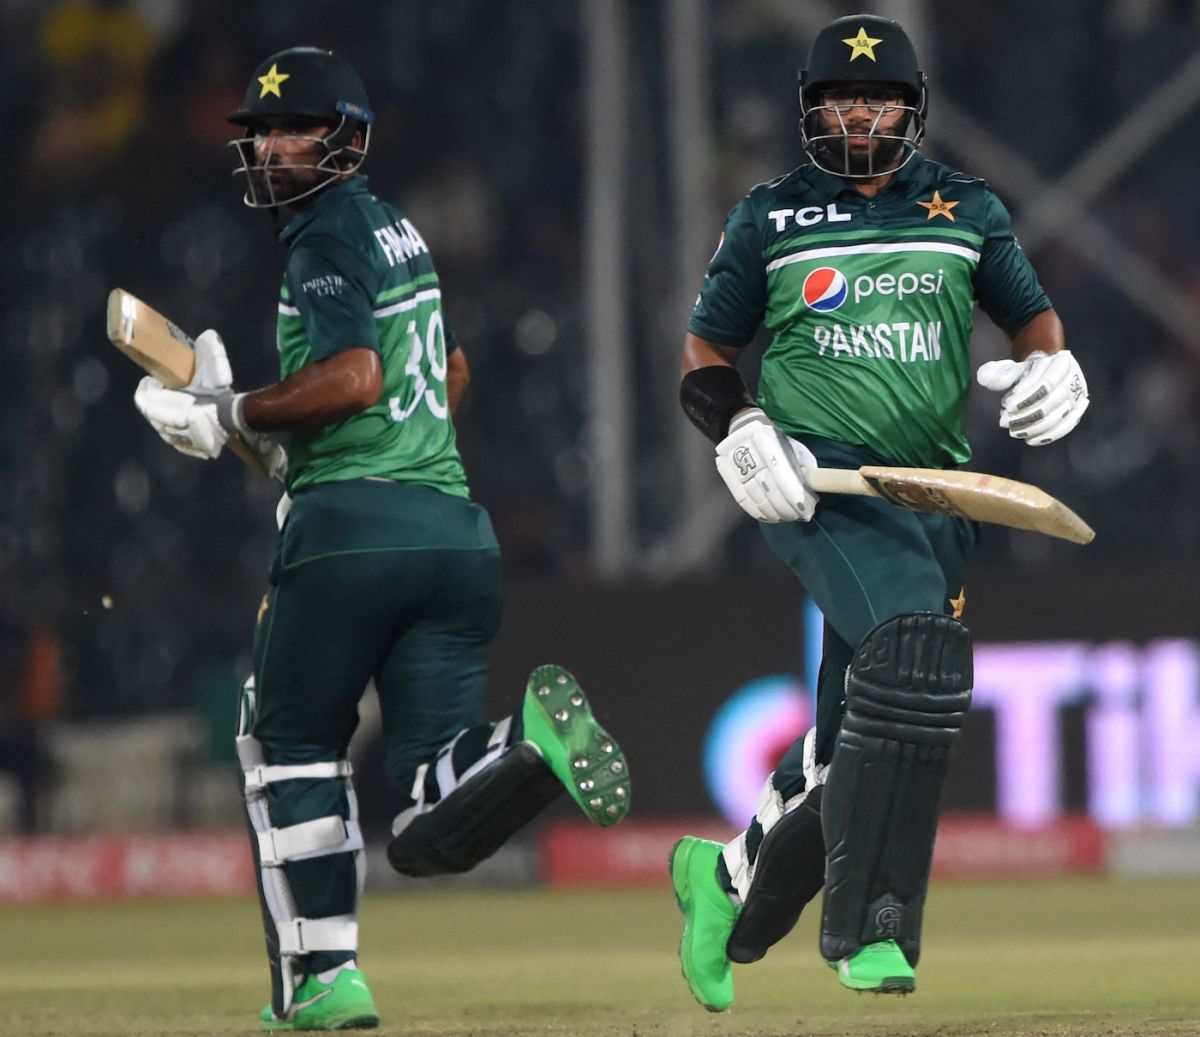 Fakhar Zaman and Imam-ul-Haq put on a century stand for the first wicket, Pakistan vs Australia, 2nd ODI, Lahore, March 31, 2022